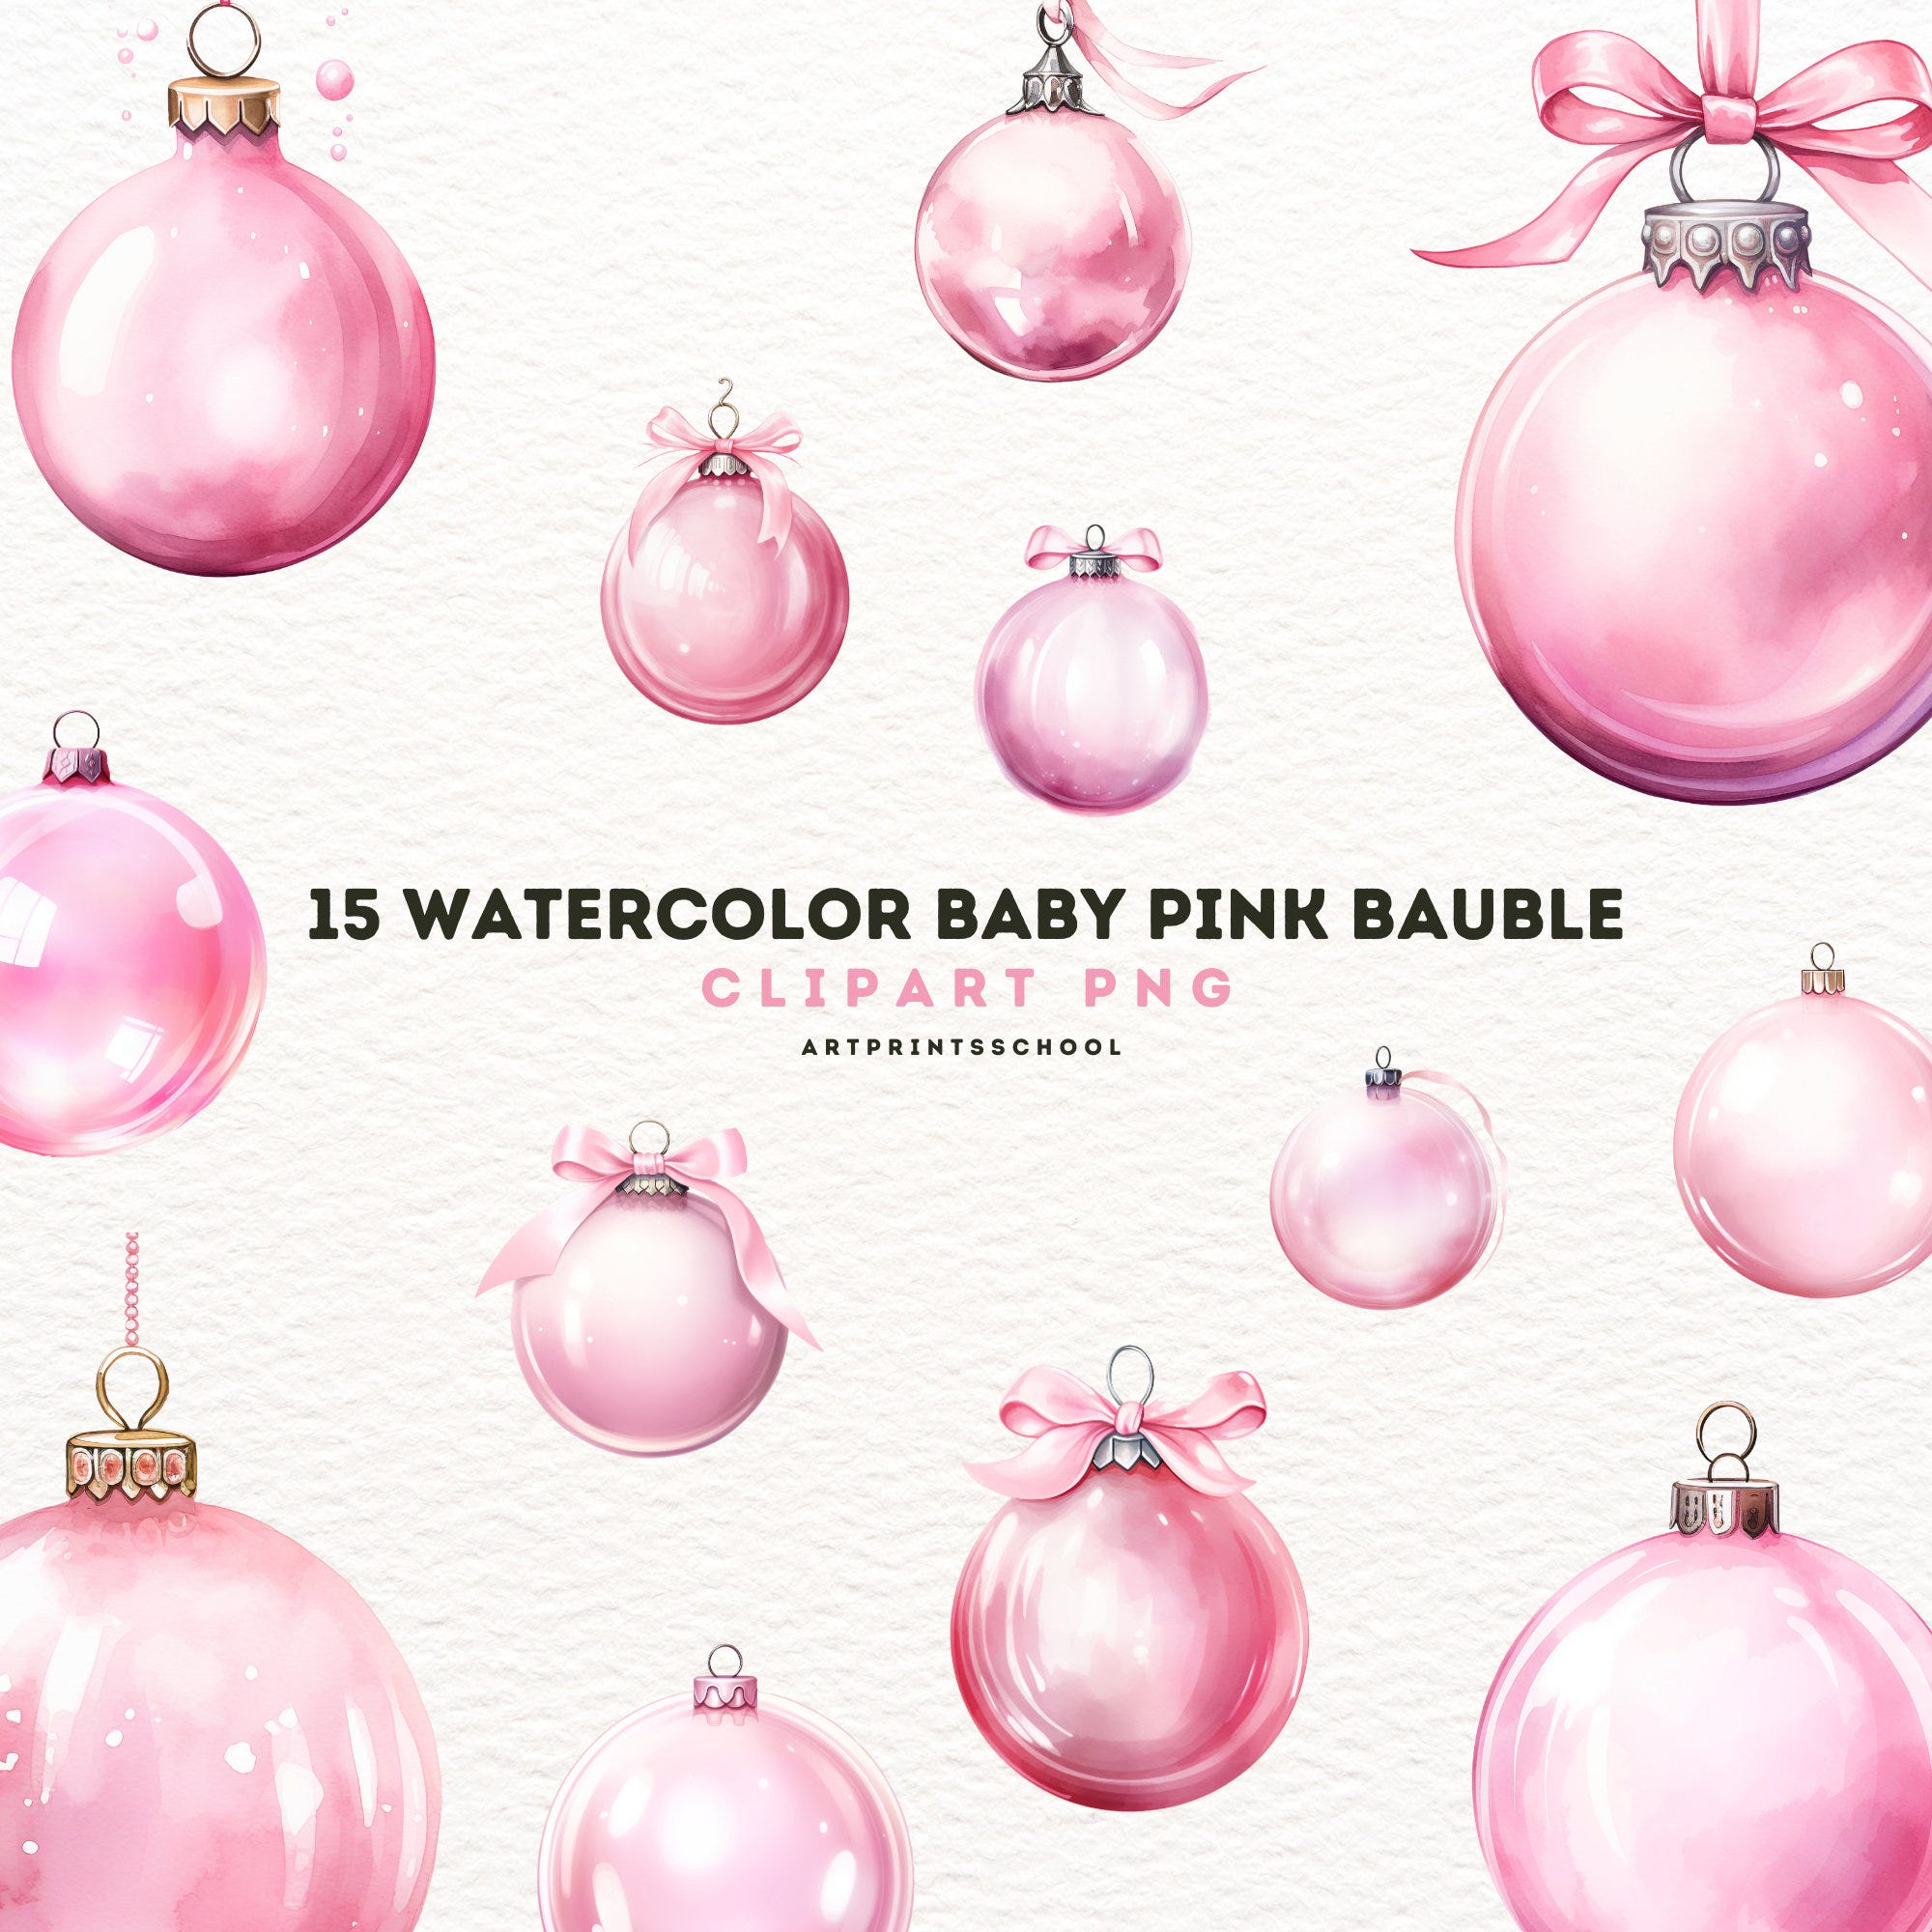 Baby Pink Christmas Bauble Clipart, 15 Watercolor High Quality PNG, Christmas Ornament, Christmas Clipart, Christmas Decoration Clipart